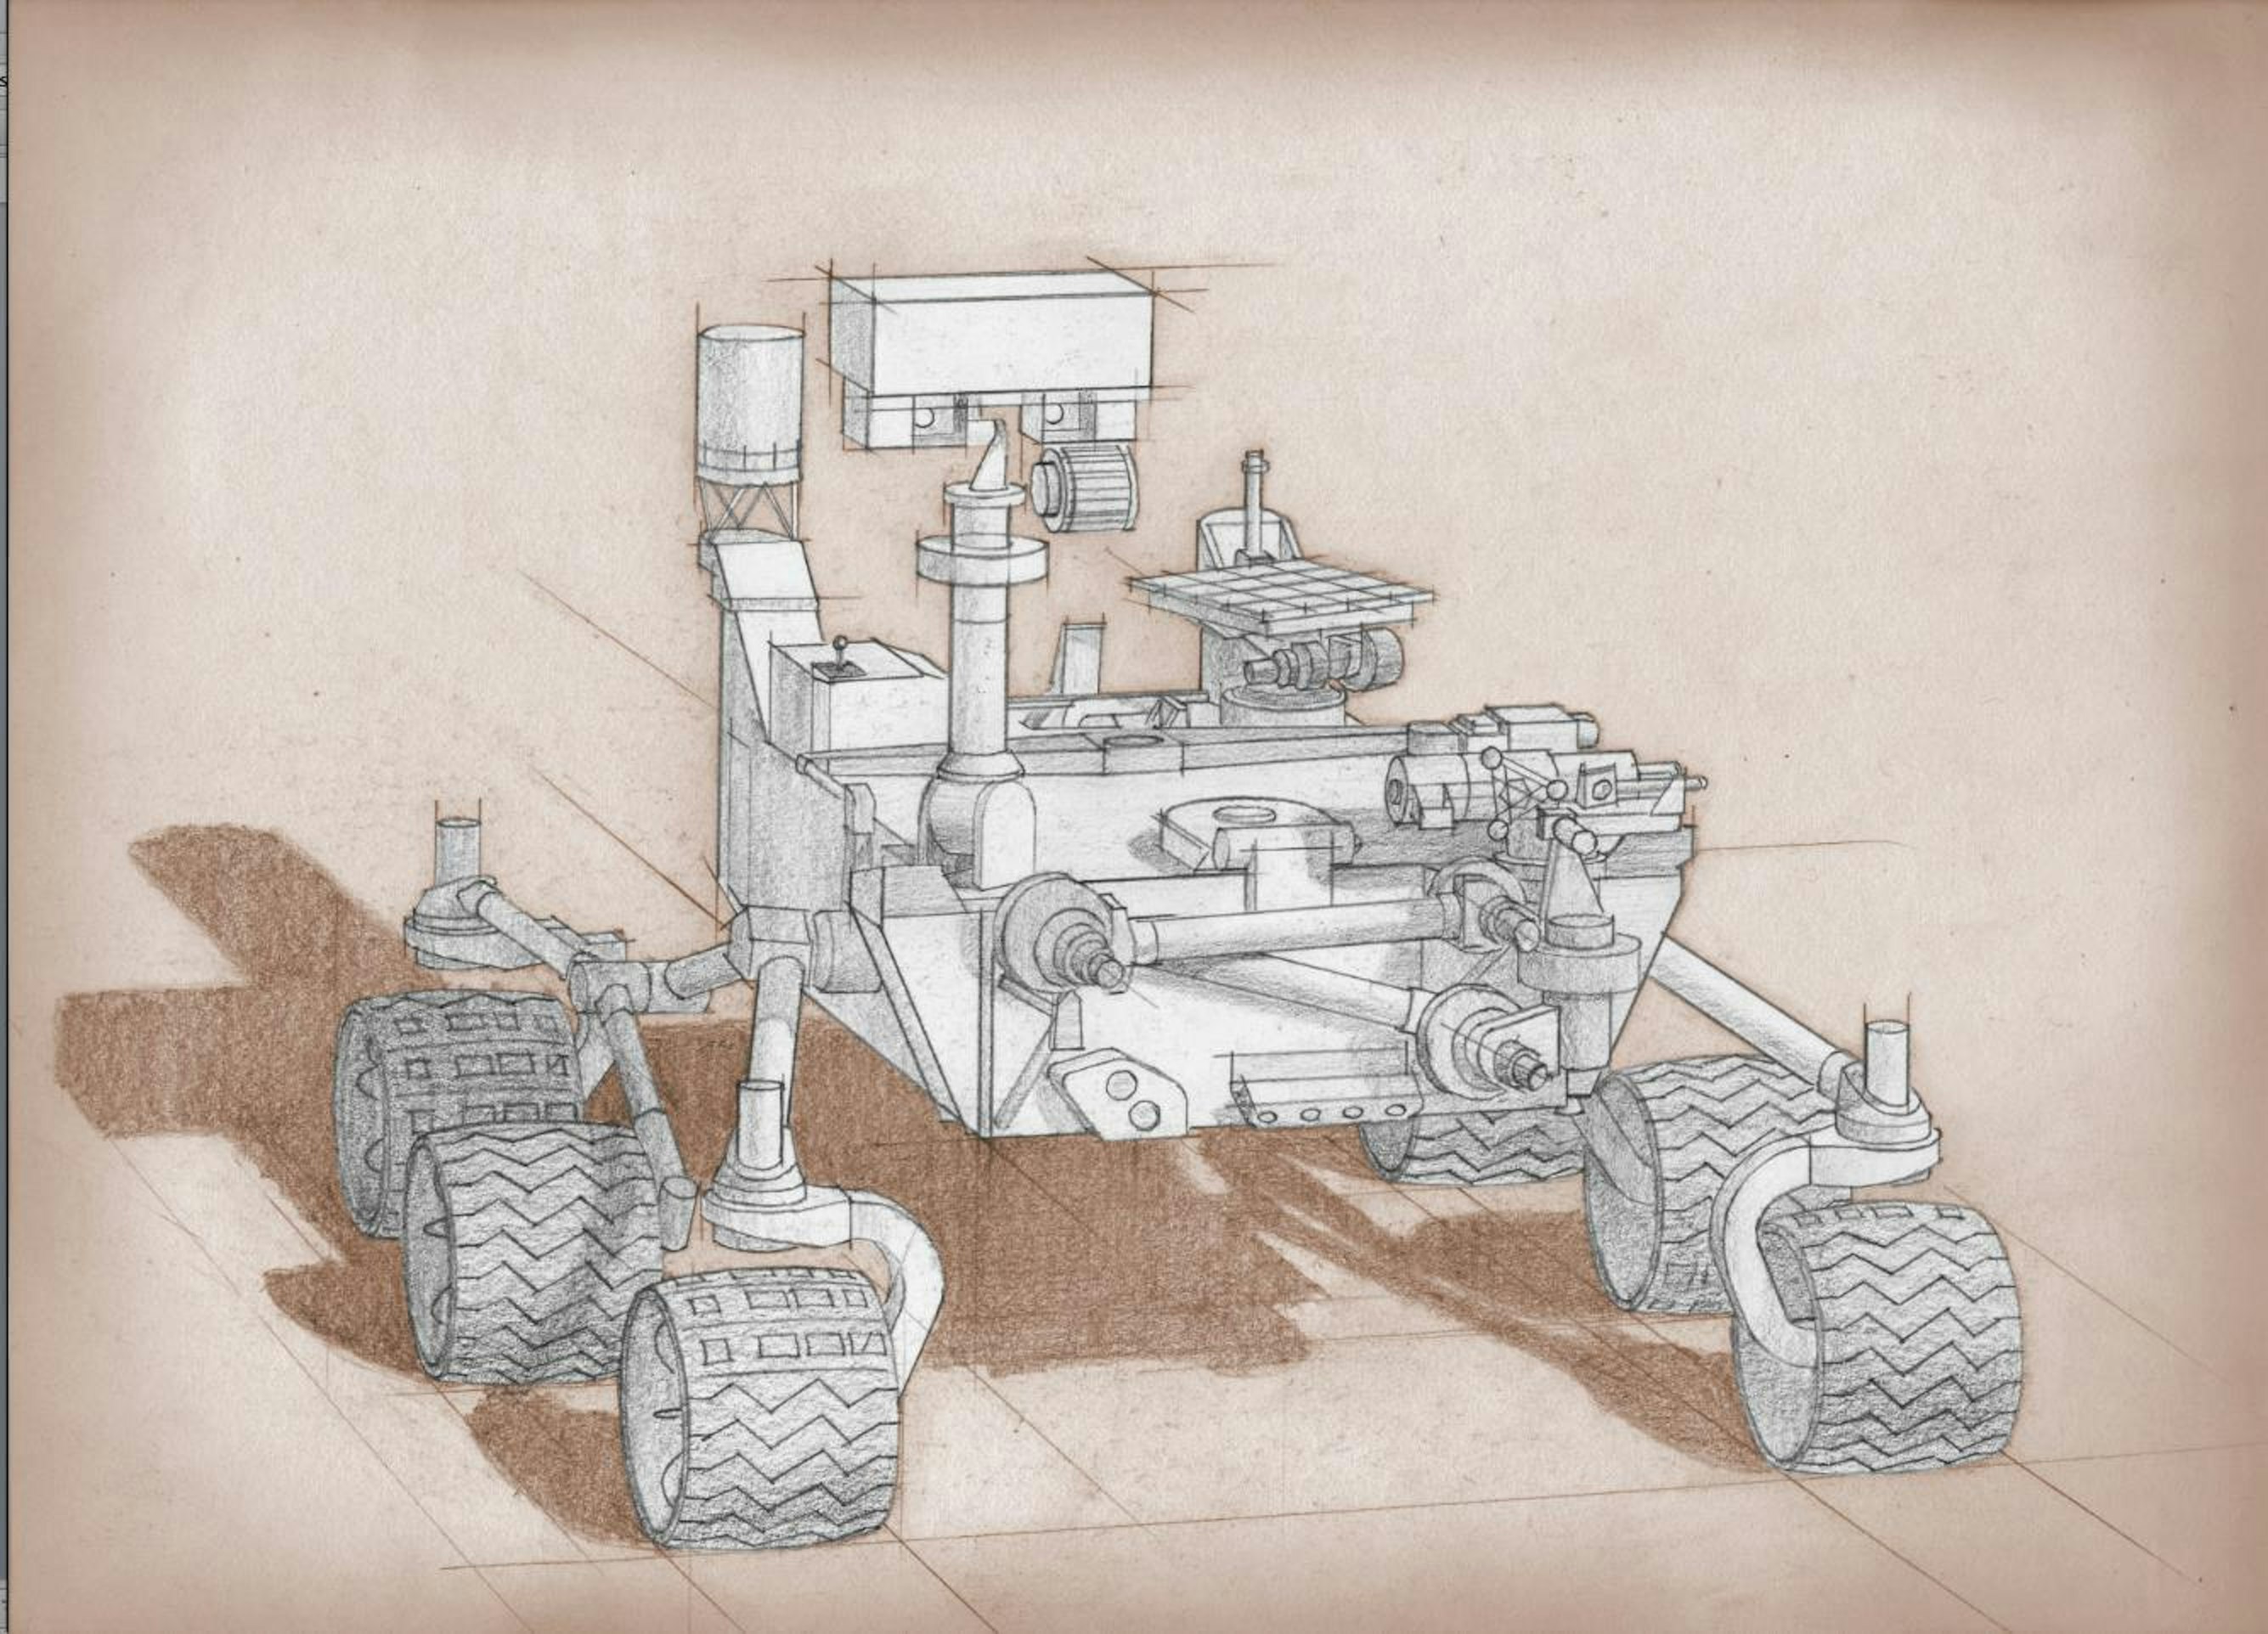 NASA's Mars 2020 rover will be a souped up version of Curiosity.